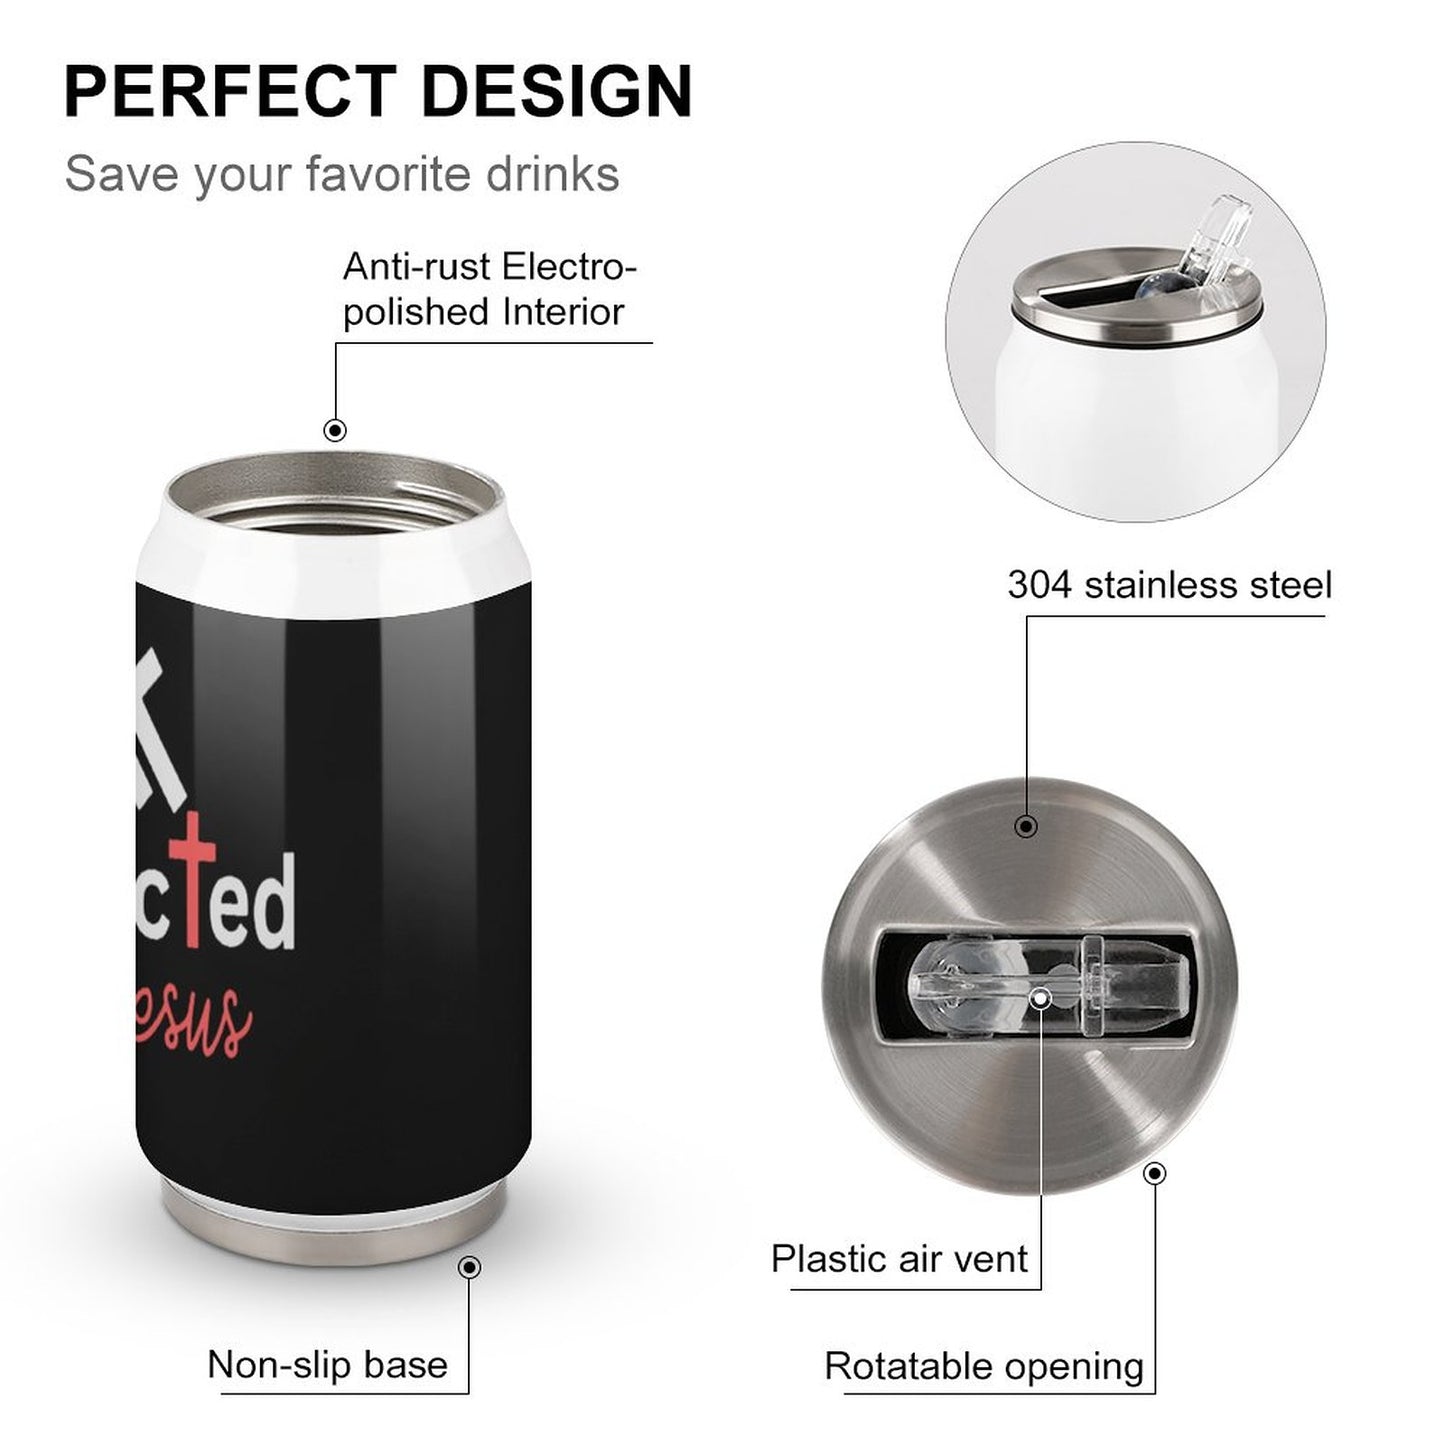 Addicted To Jesus Unique Christian Stainless Steel Tumbler with Straw SALE-Personal Design